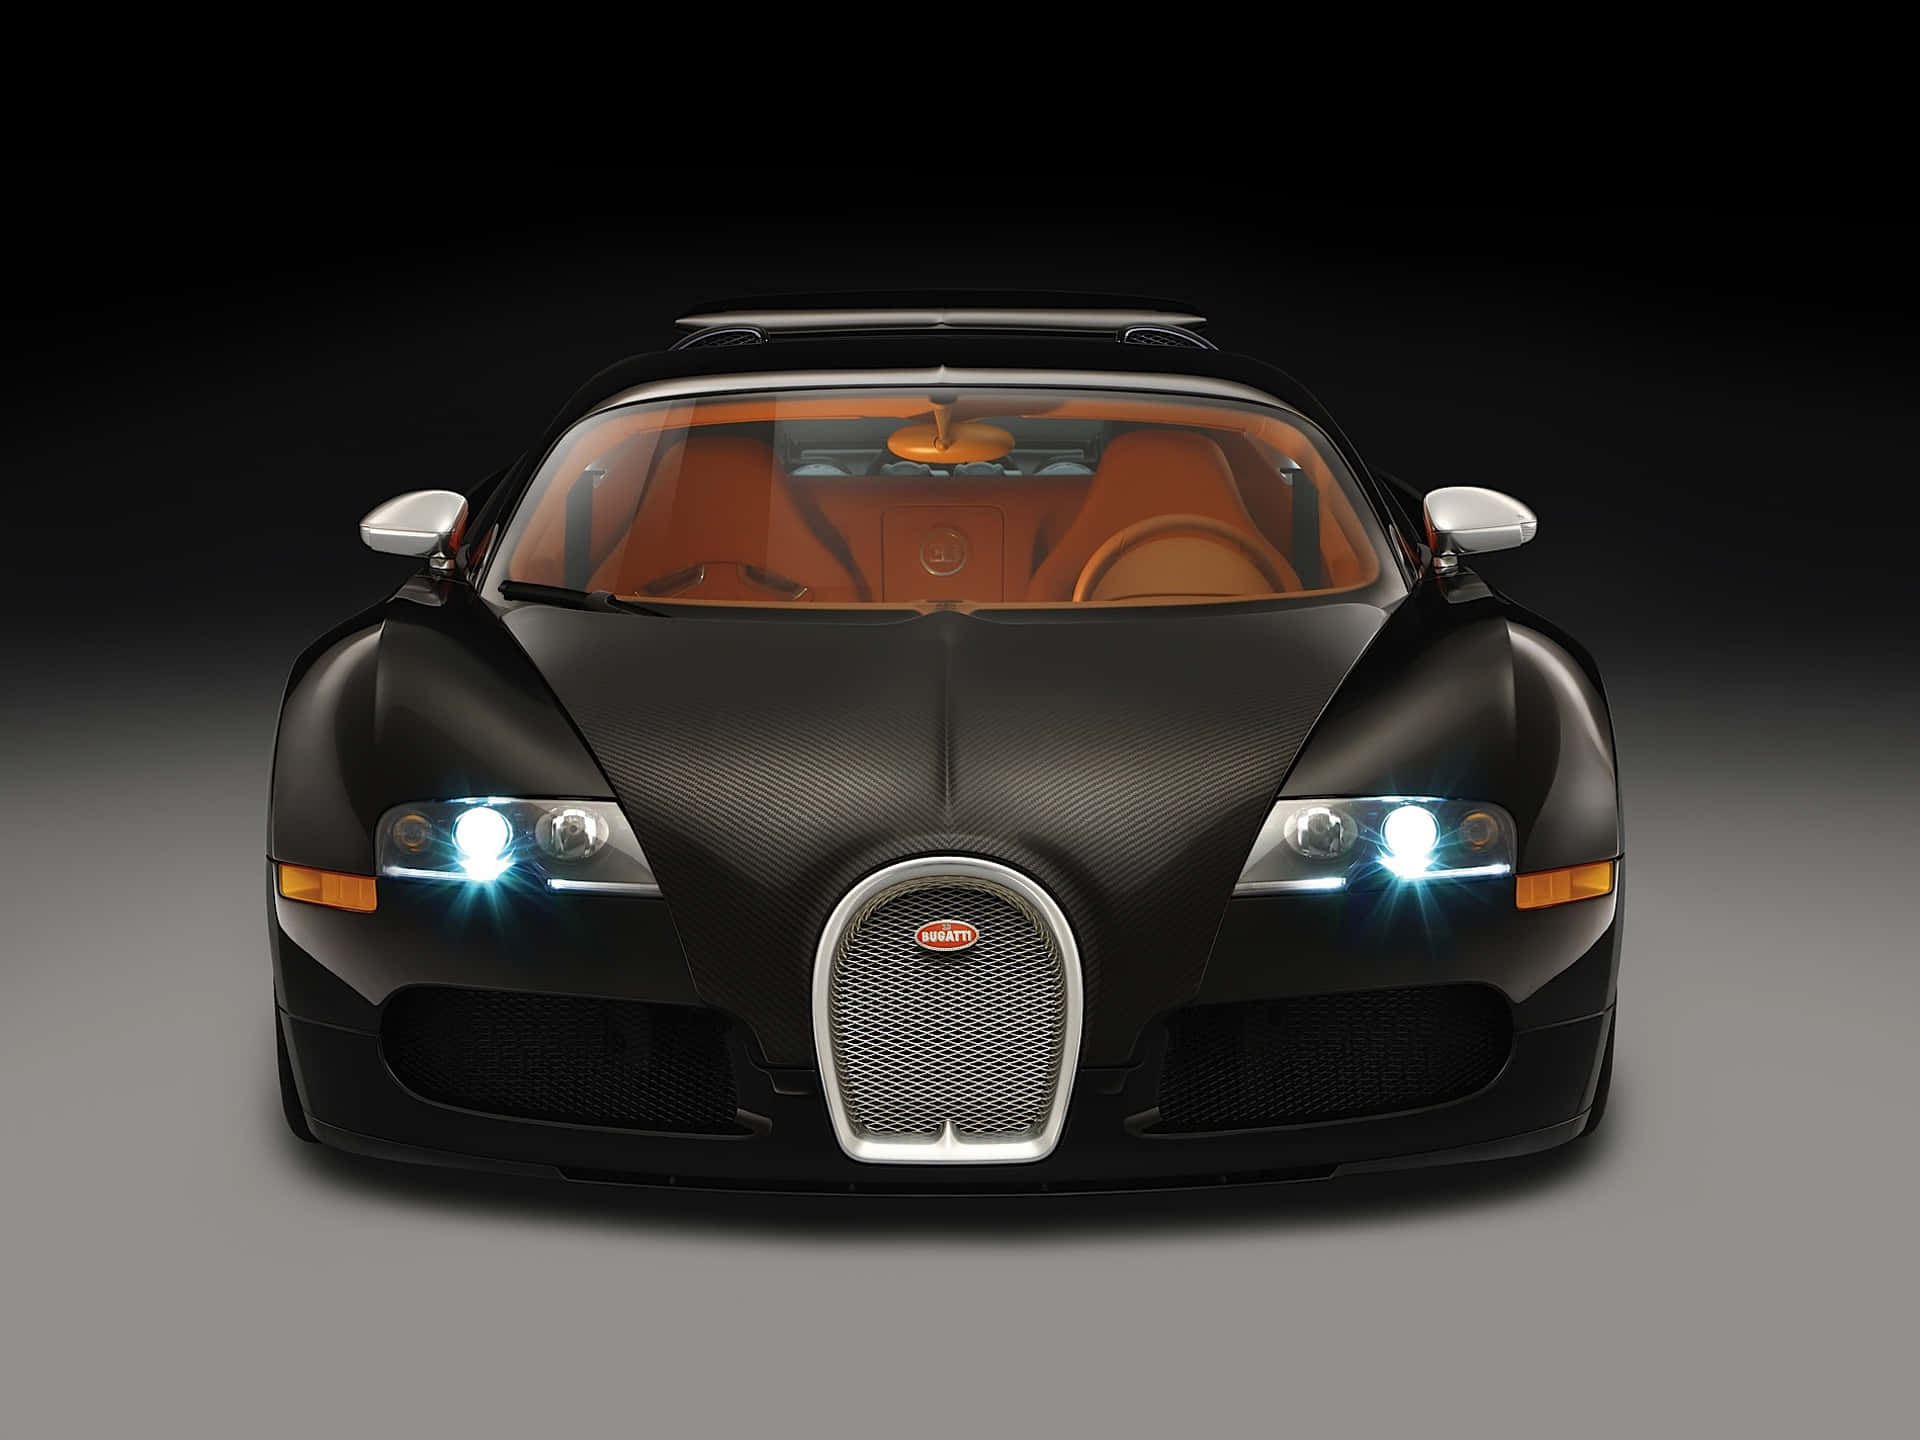 Blaze the Streets in Style with a Bugatti Wallpaper